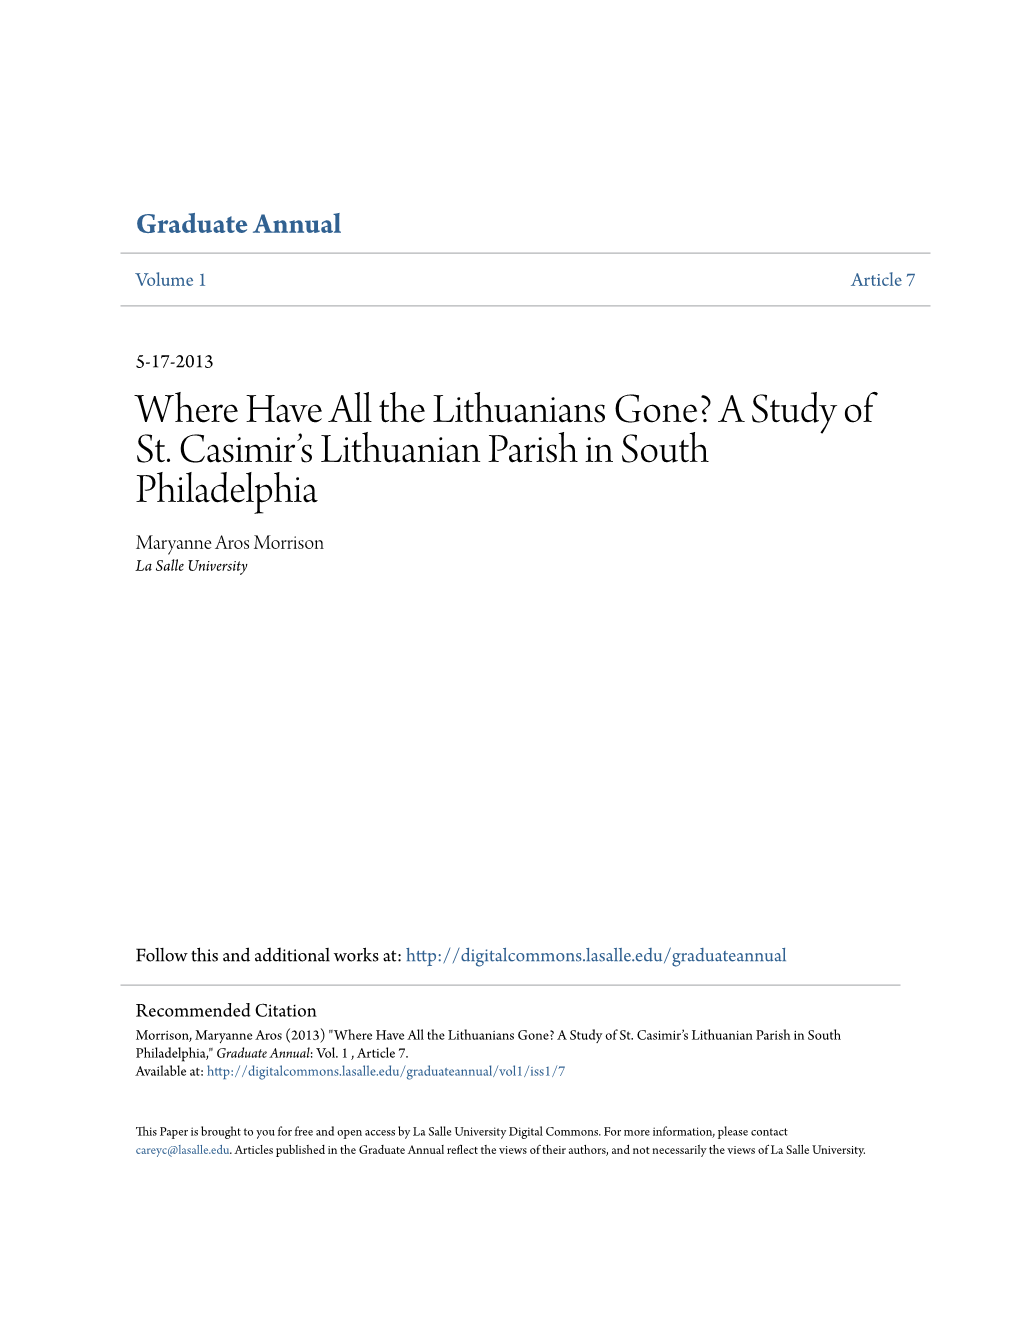 A Study of St. Casimir's Lithuanian Parish in South Philadelphia